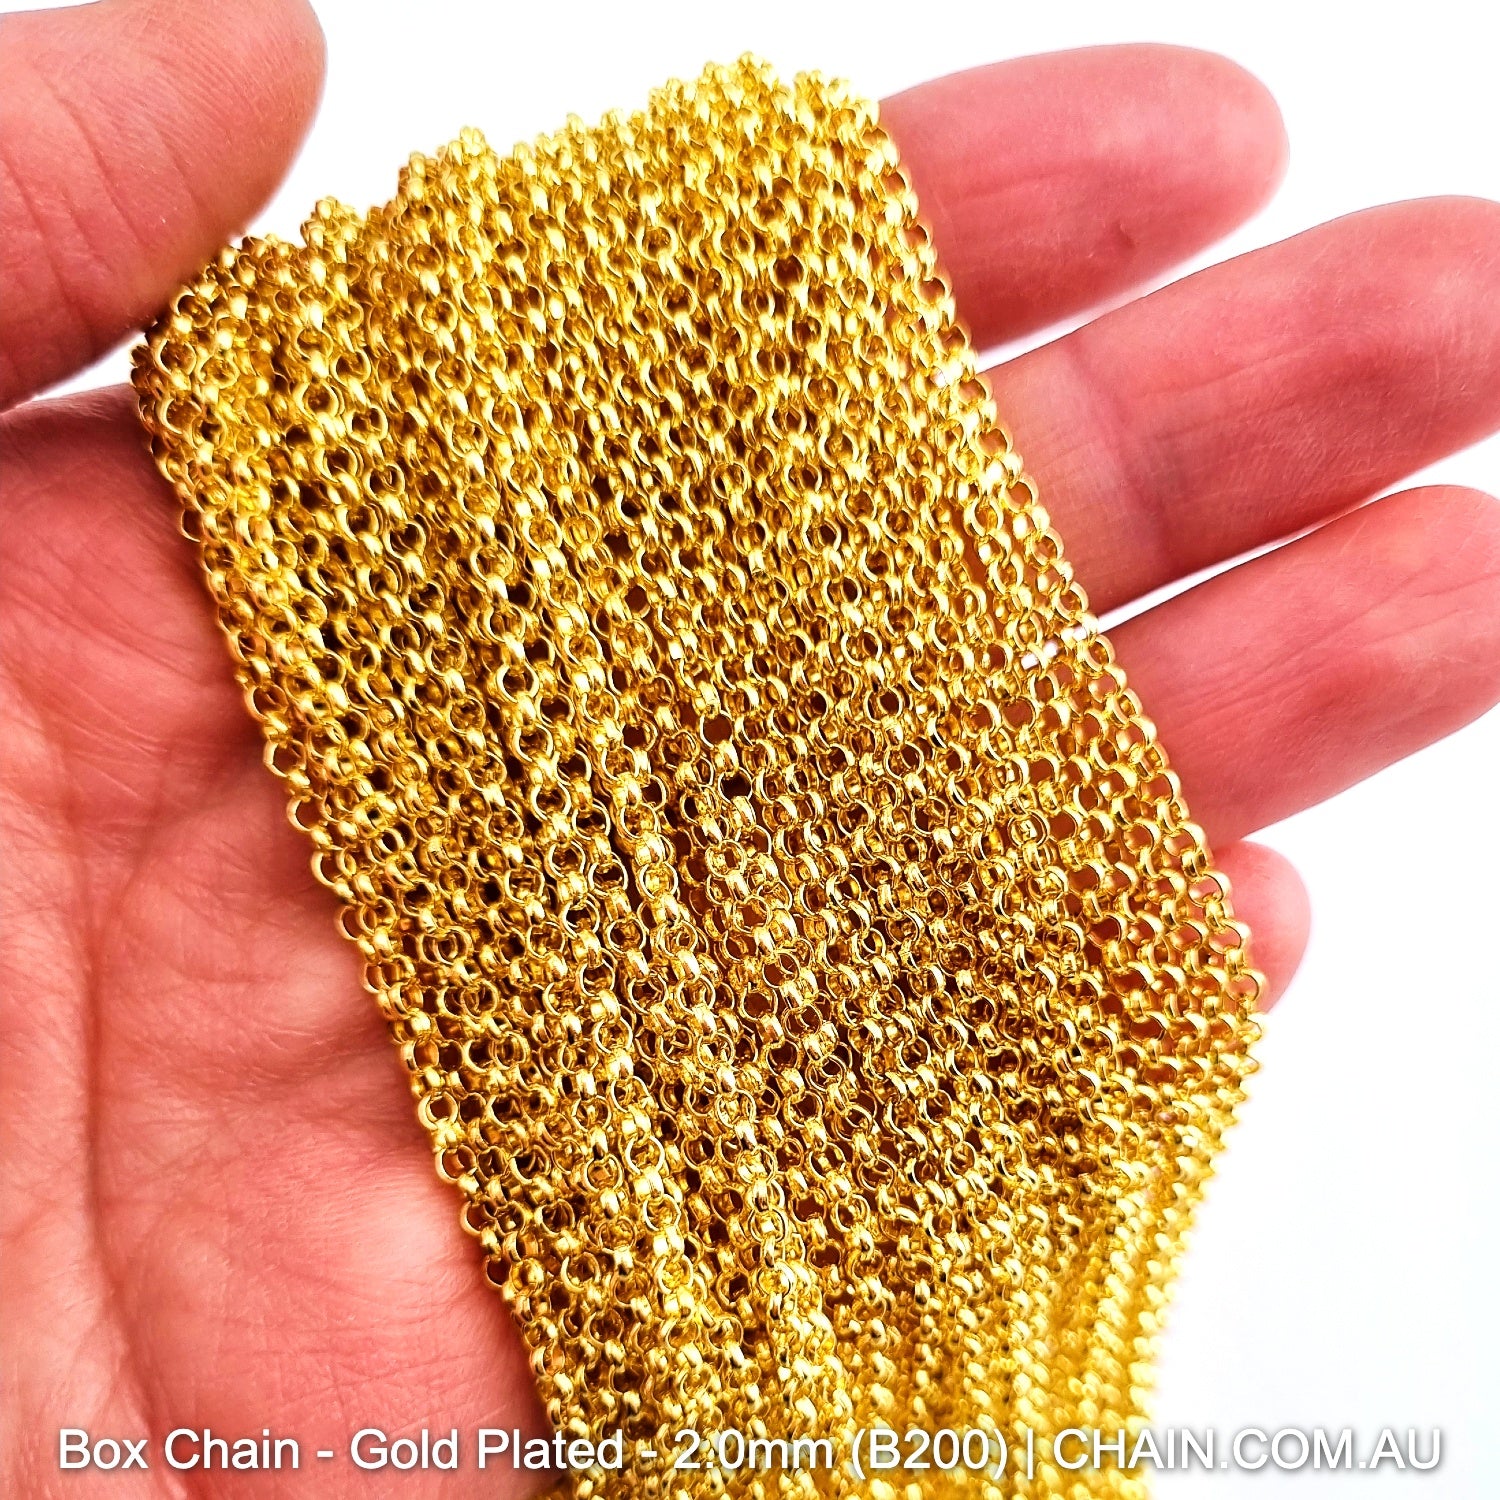 Box Jewellery Chain Gold Plated. Size: 2.0mm x 25m Reel. Shop Jewellery Chain online. Australia wide shipping. Chain.com.au